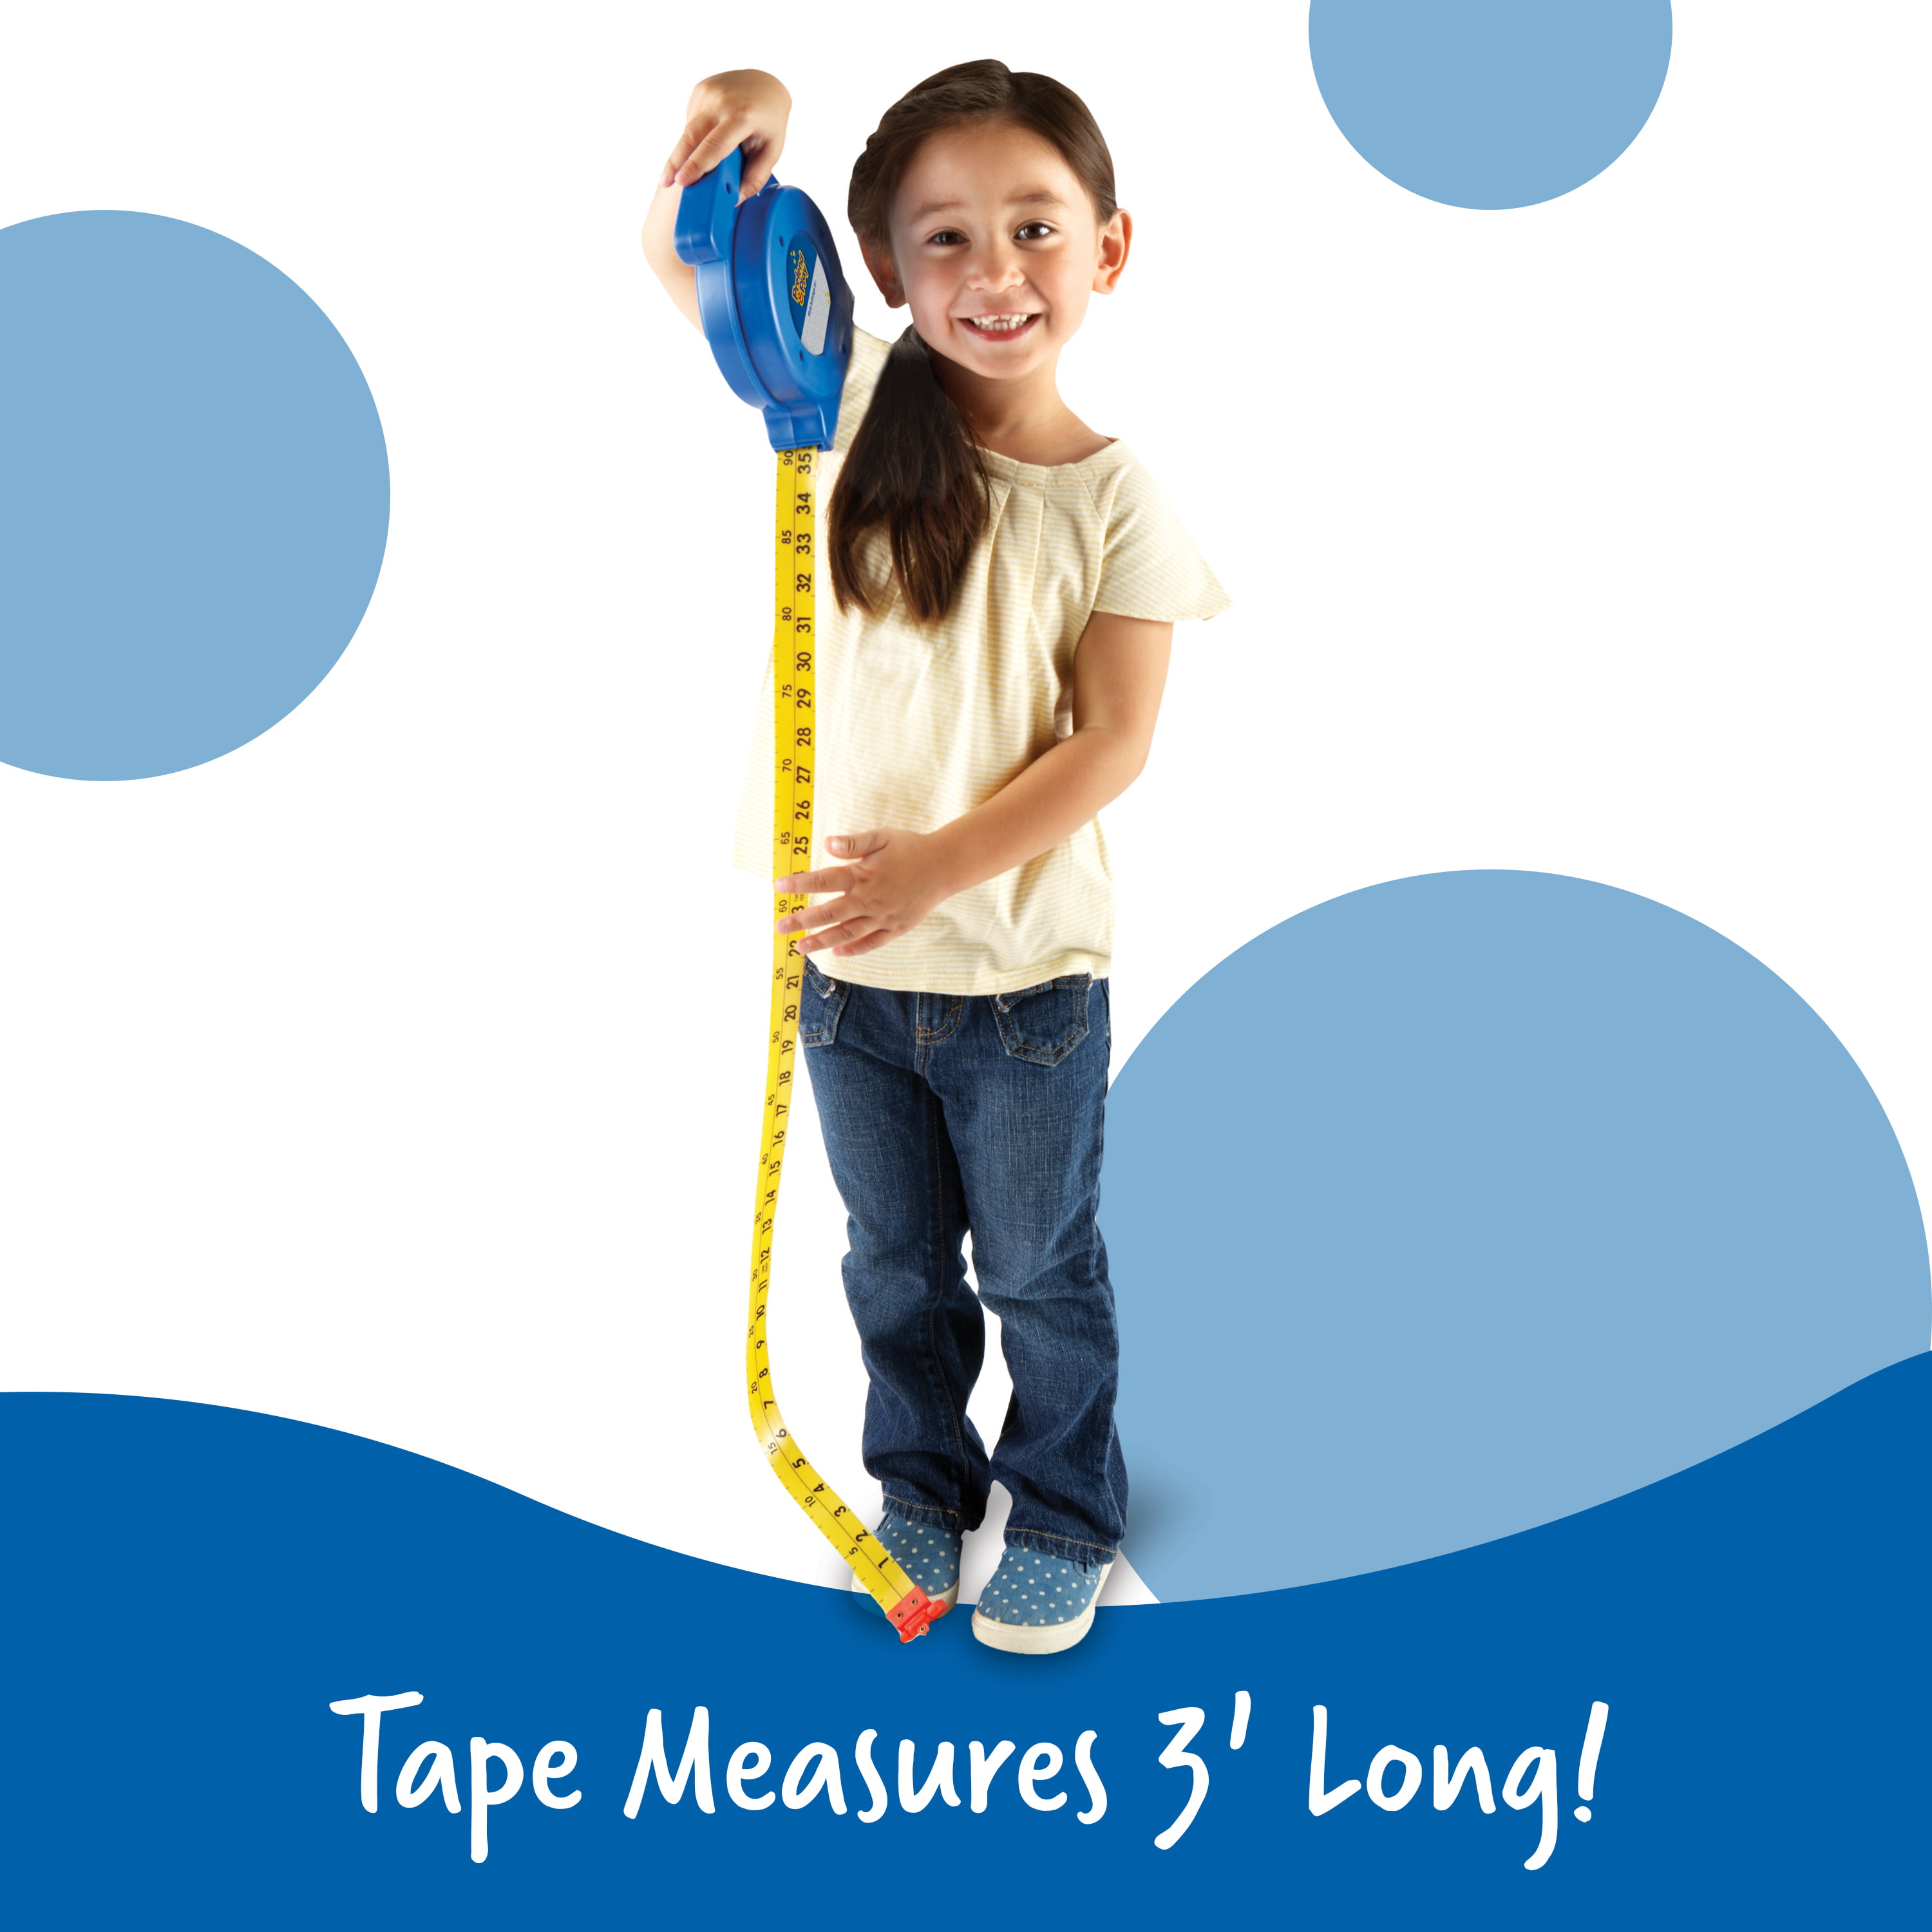 Constructive Playthings Big Tape Measure for Kids, Educational Pretend Play  Toy for Children